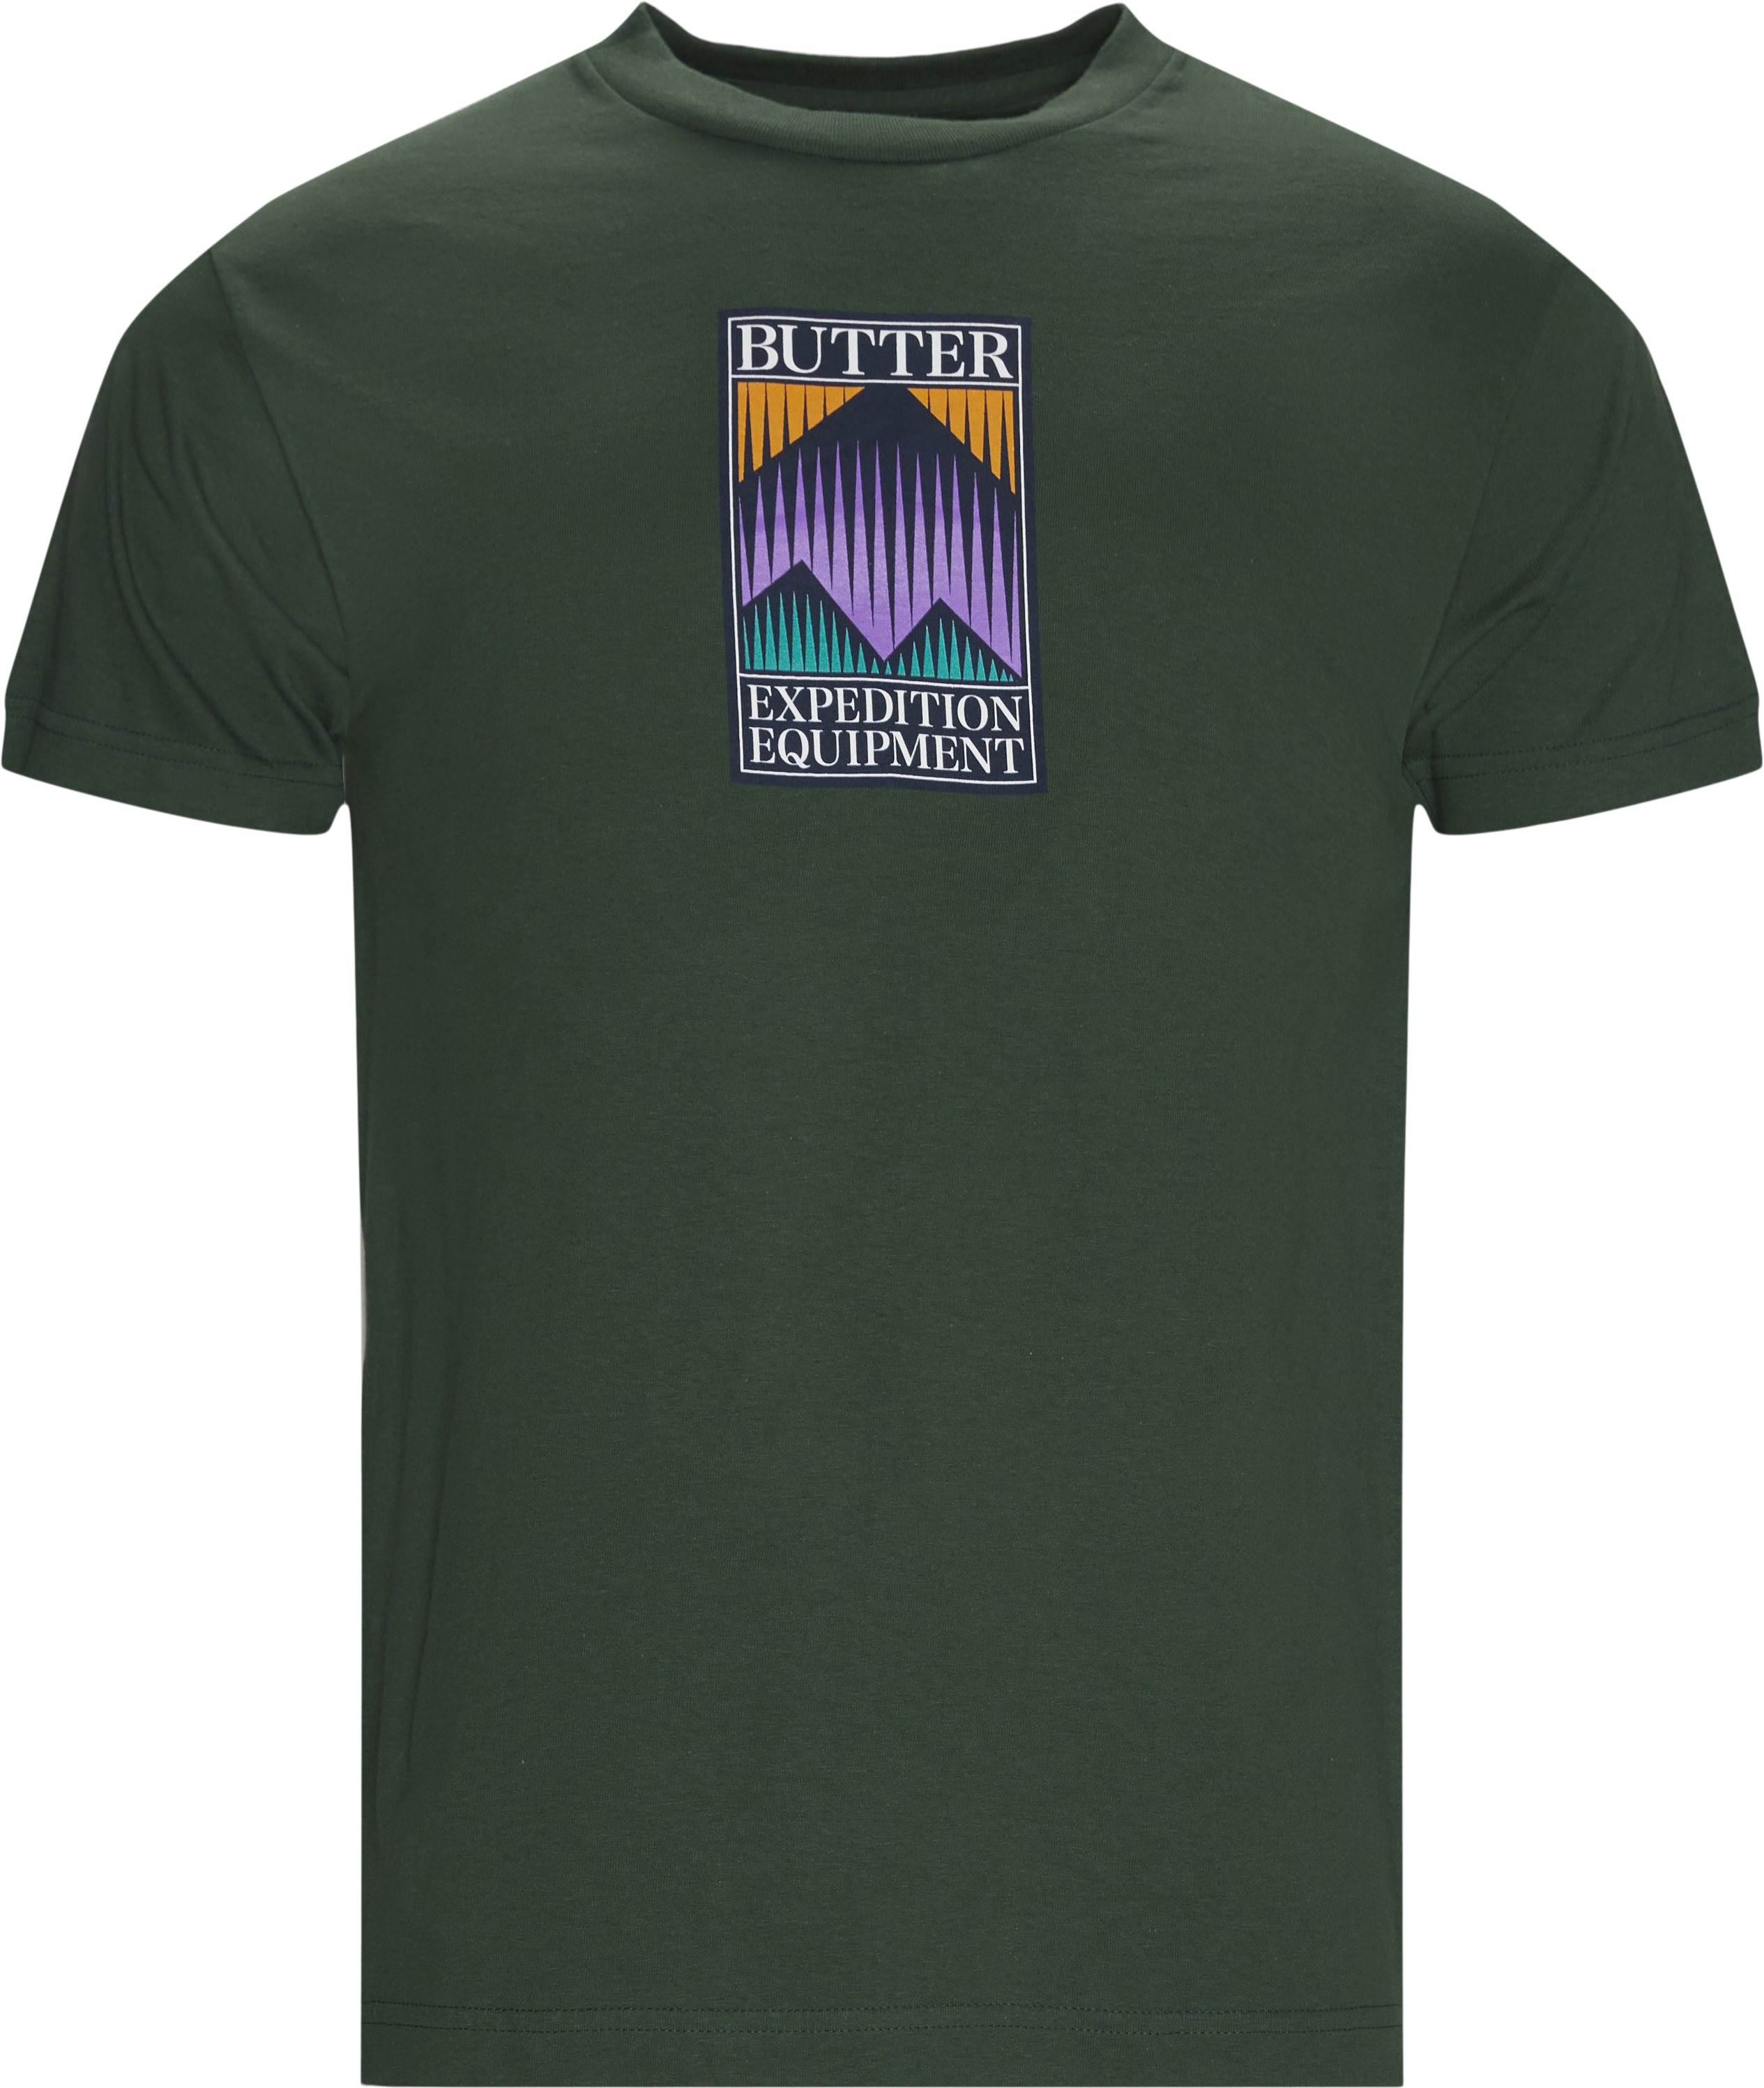 Expedition Tee - T-shirts - Regular fit - Green